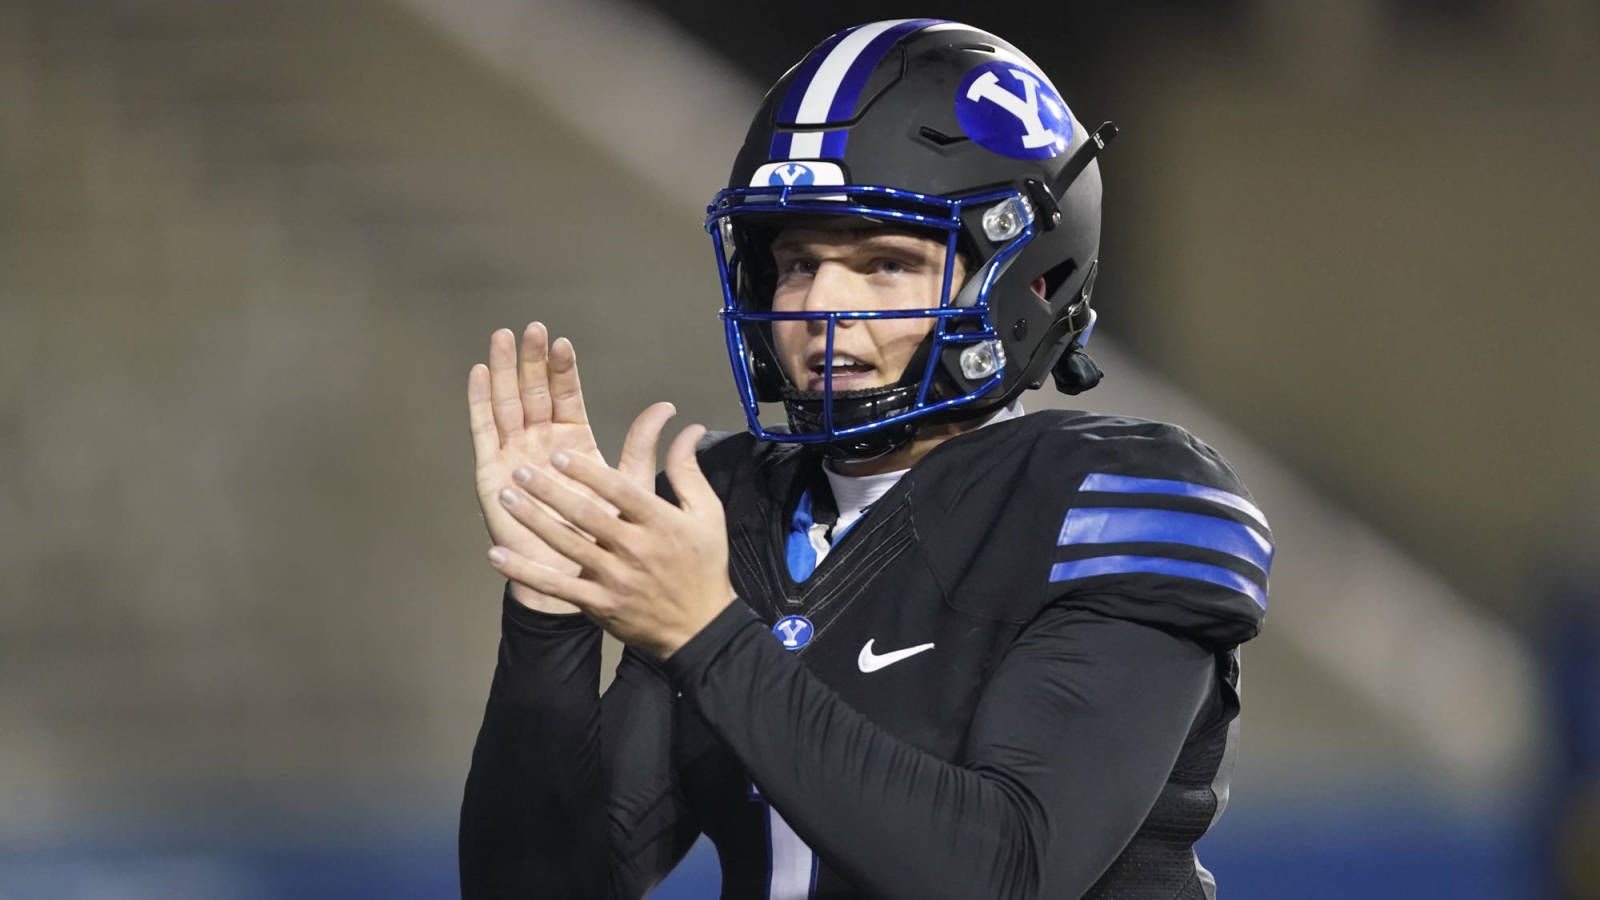 BYU QB Wilson receives 'character concerns' label as prospect